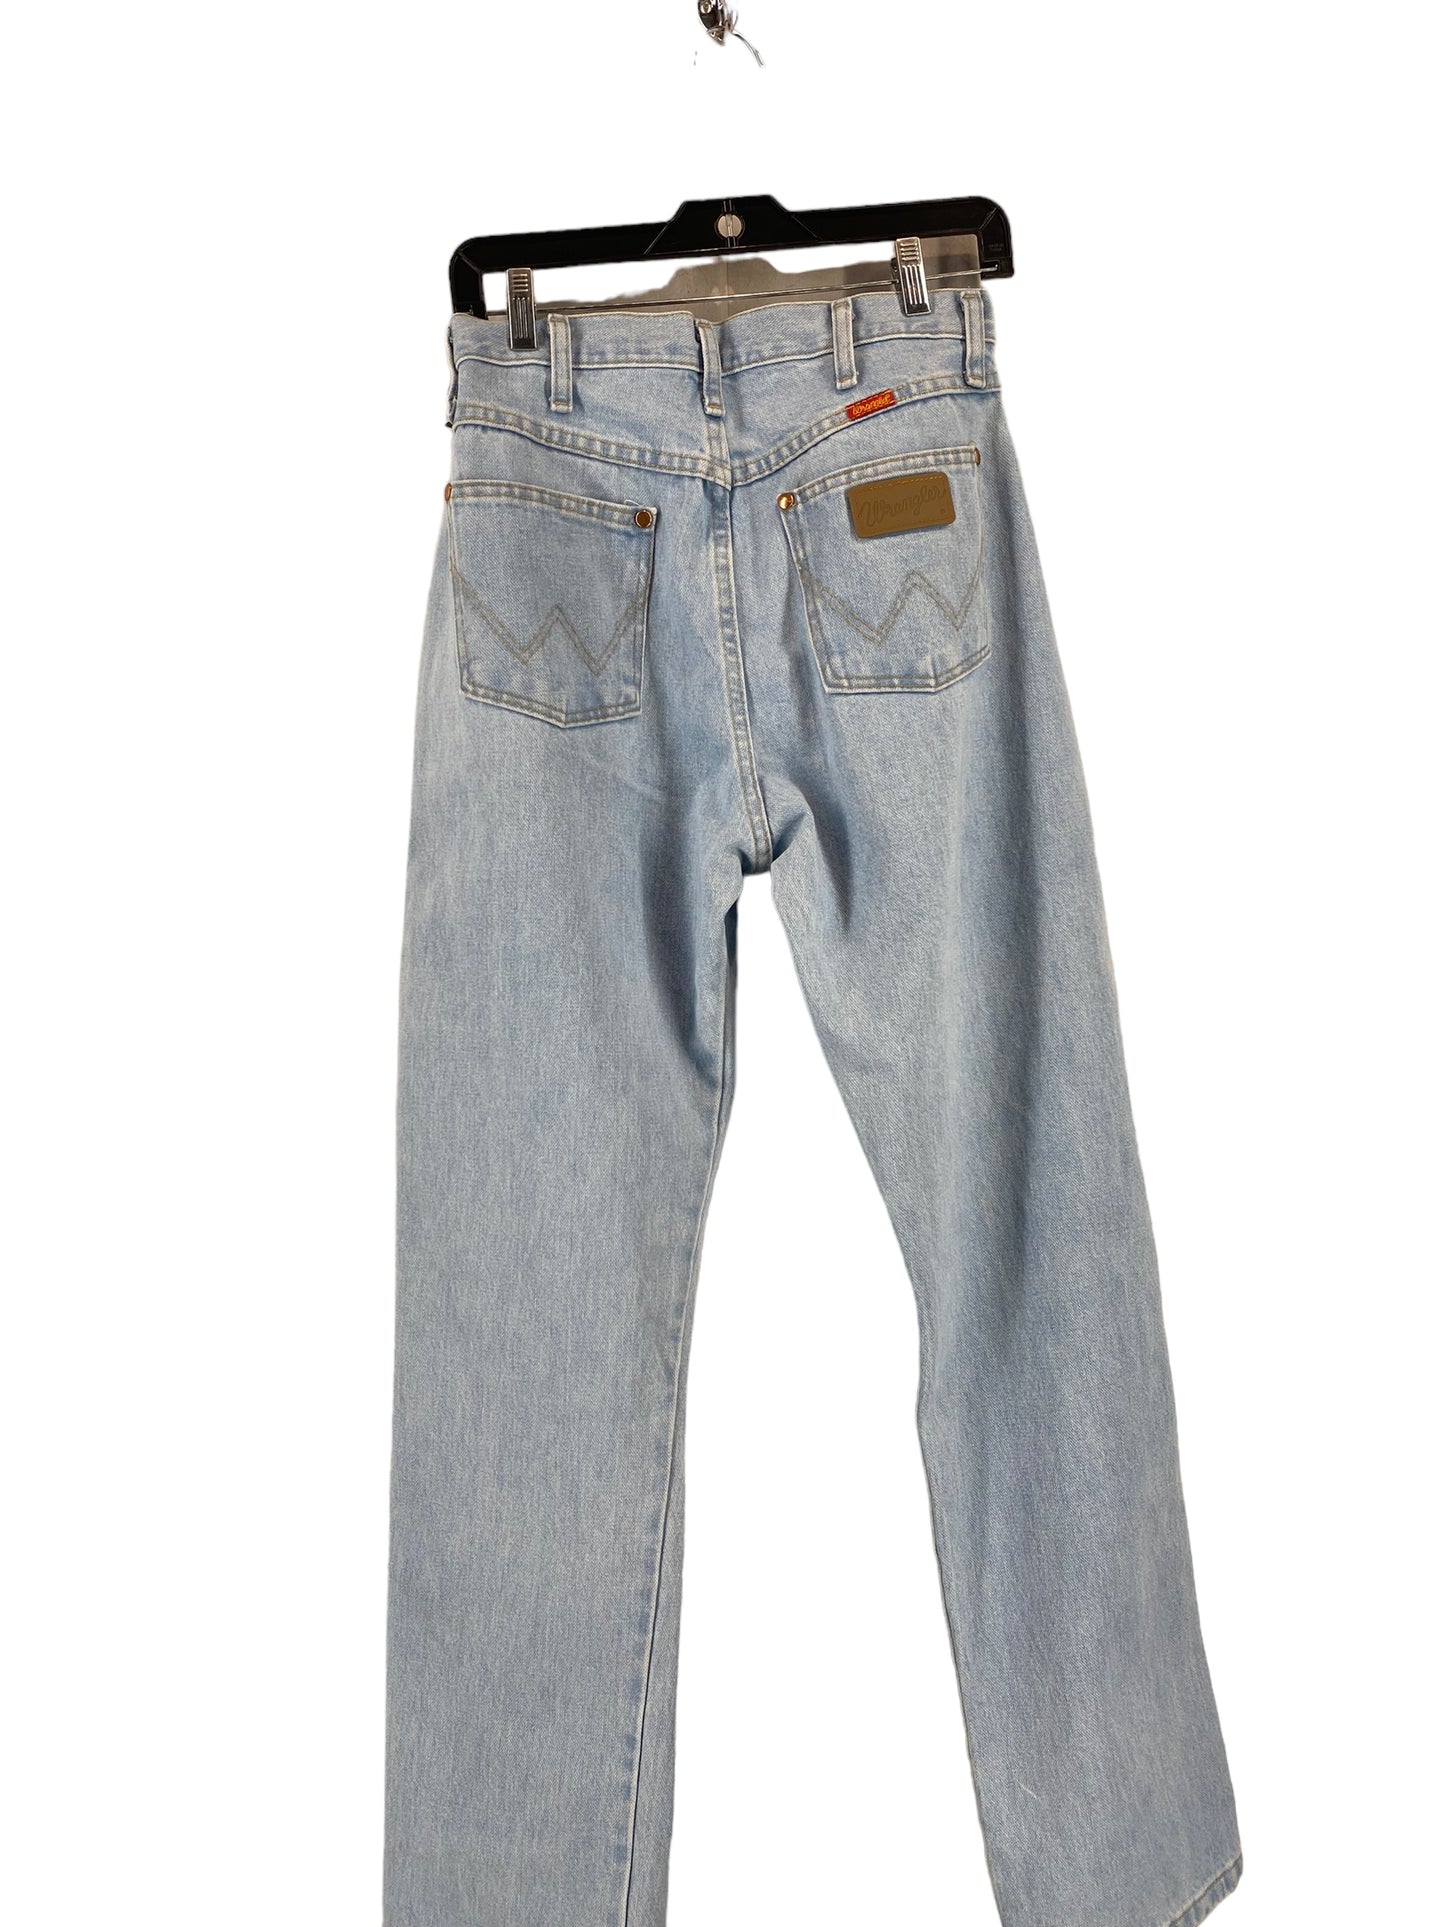 Jeans Straight By Wrangler  Size: 11